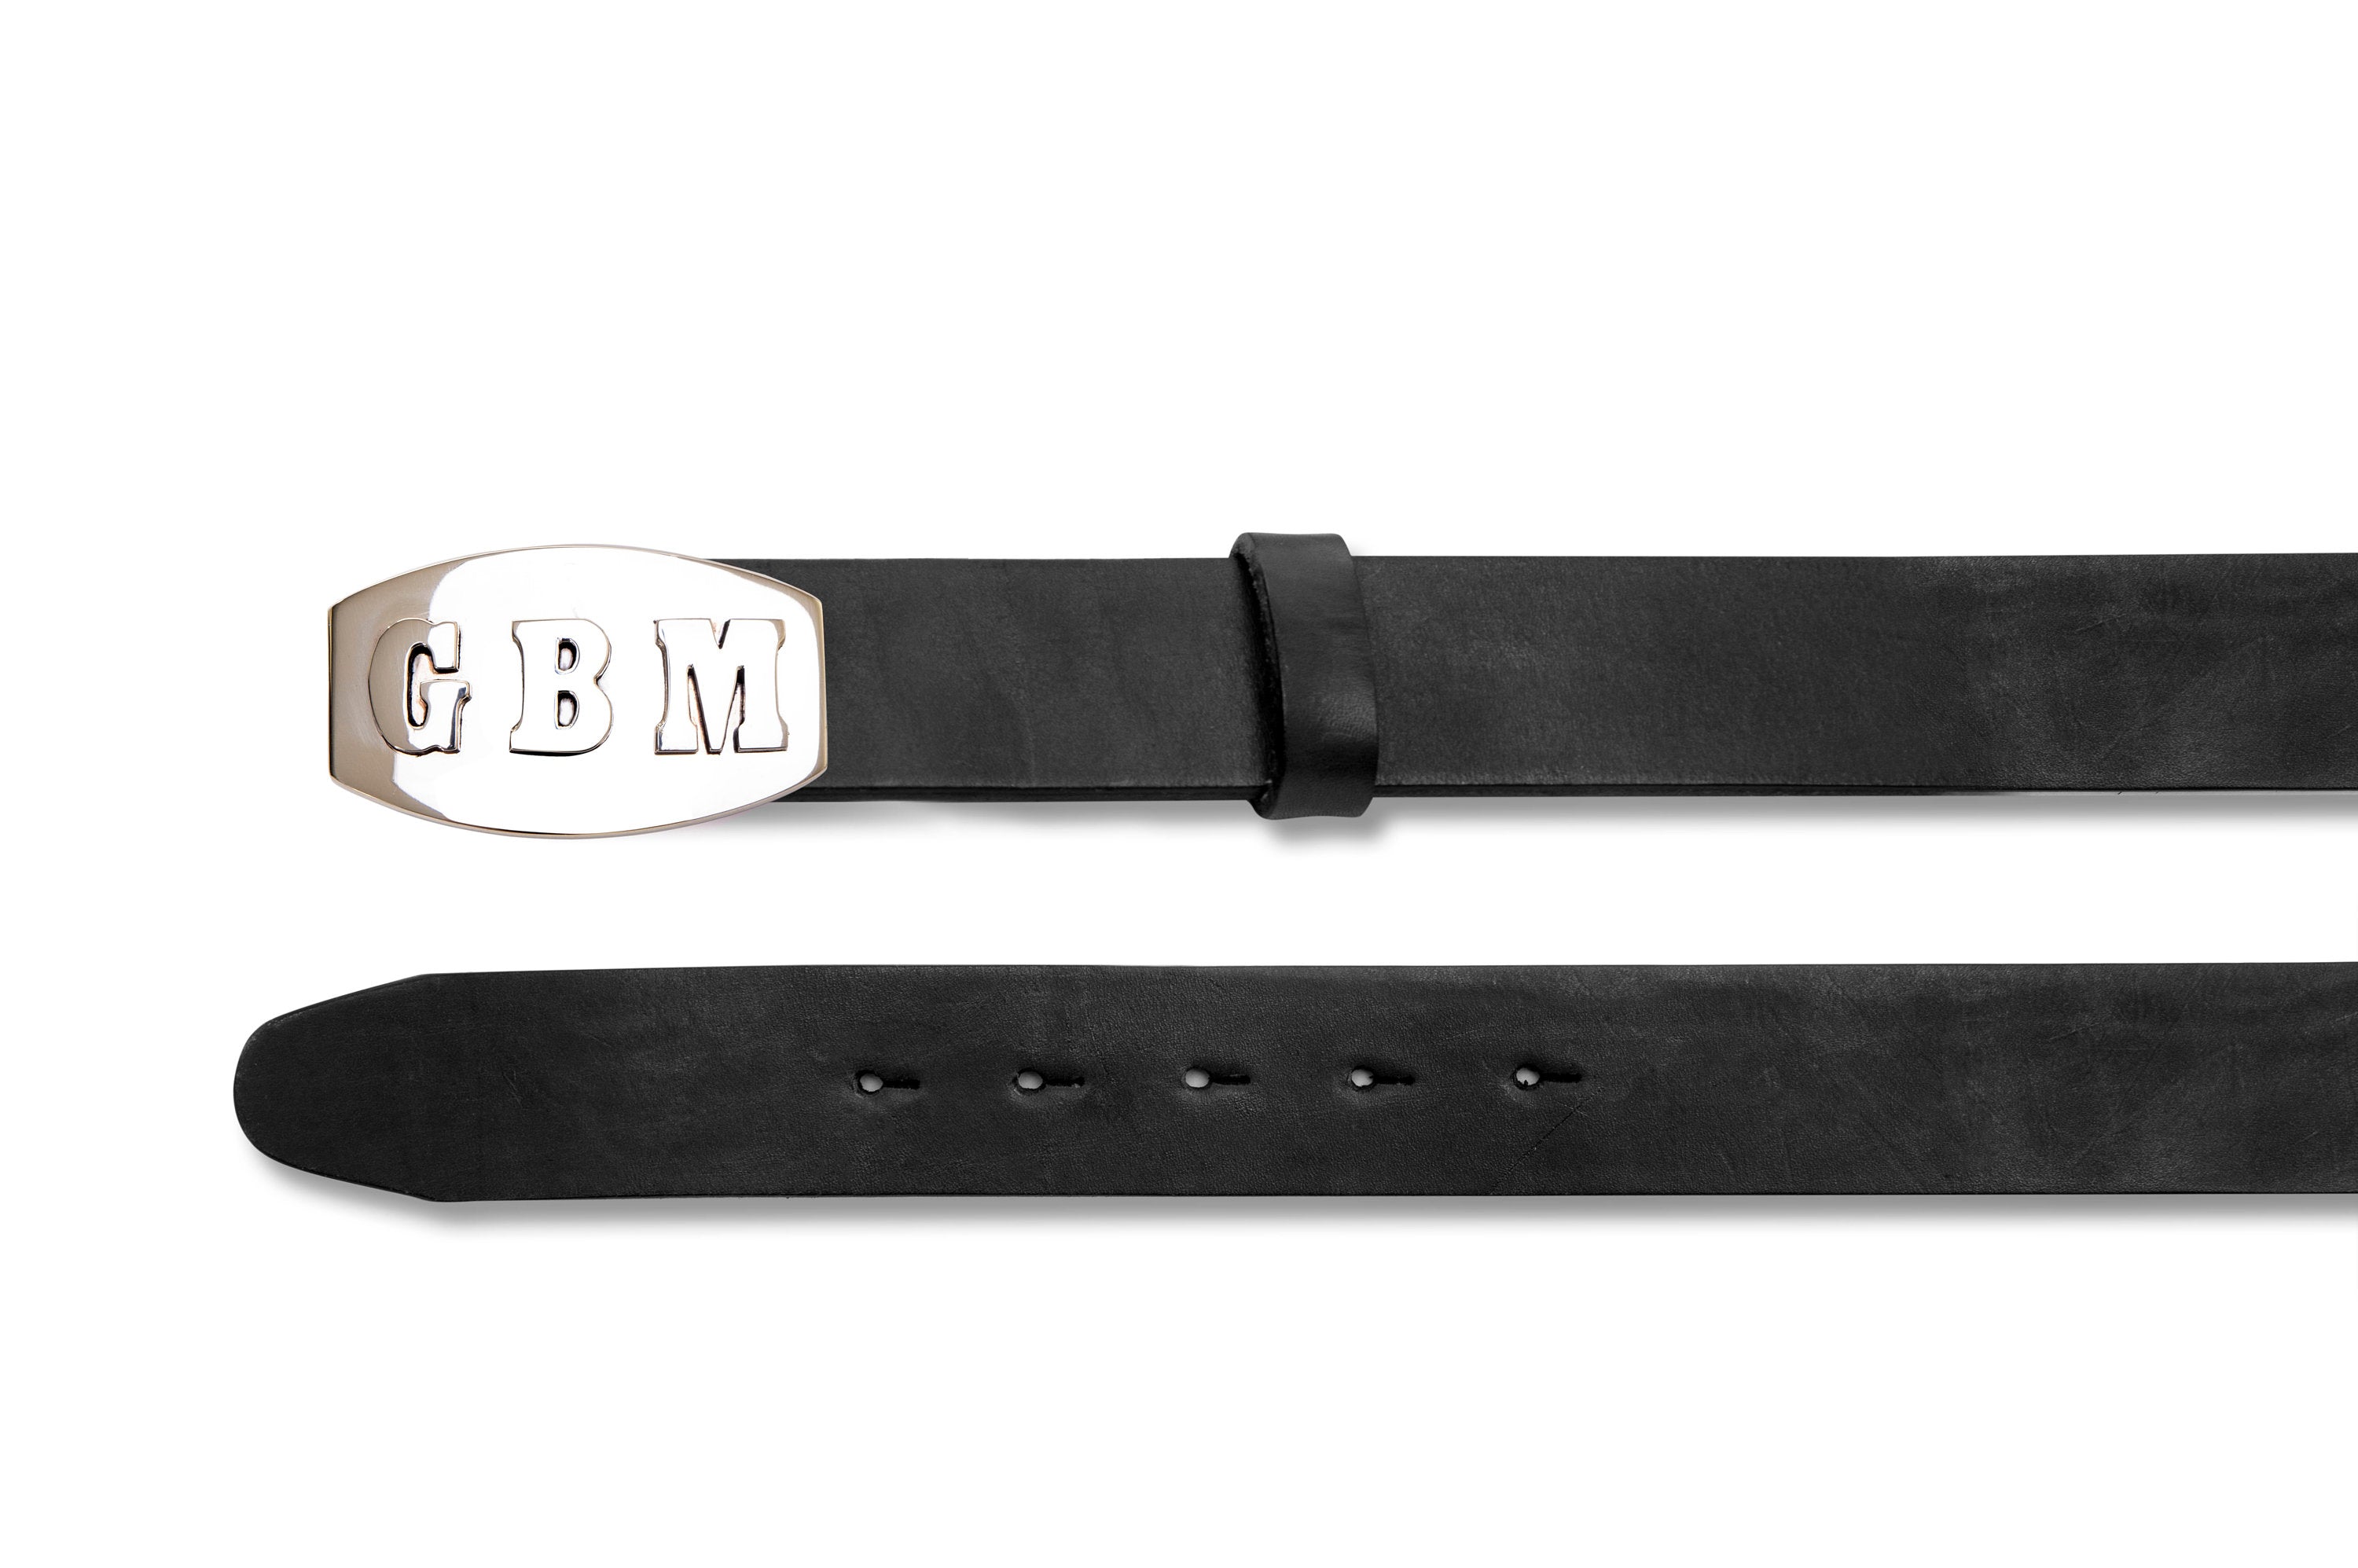 Gaucholife Belts Personalized Leather Buckle Belt